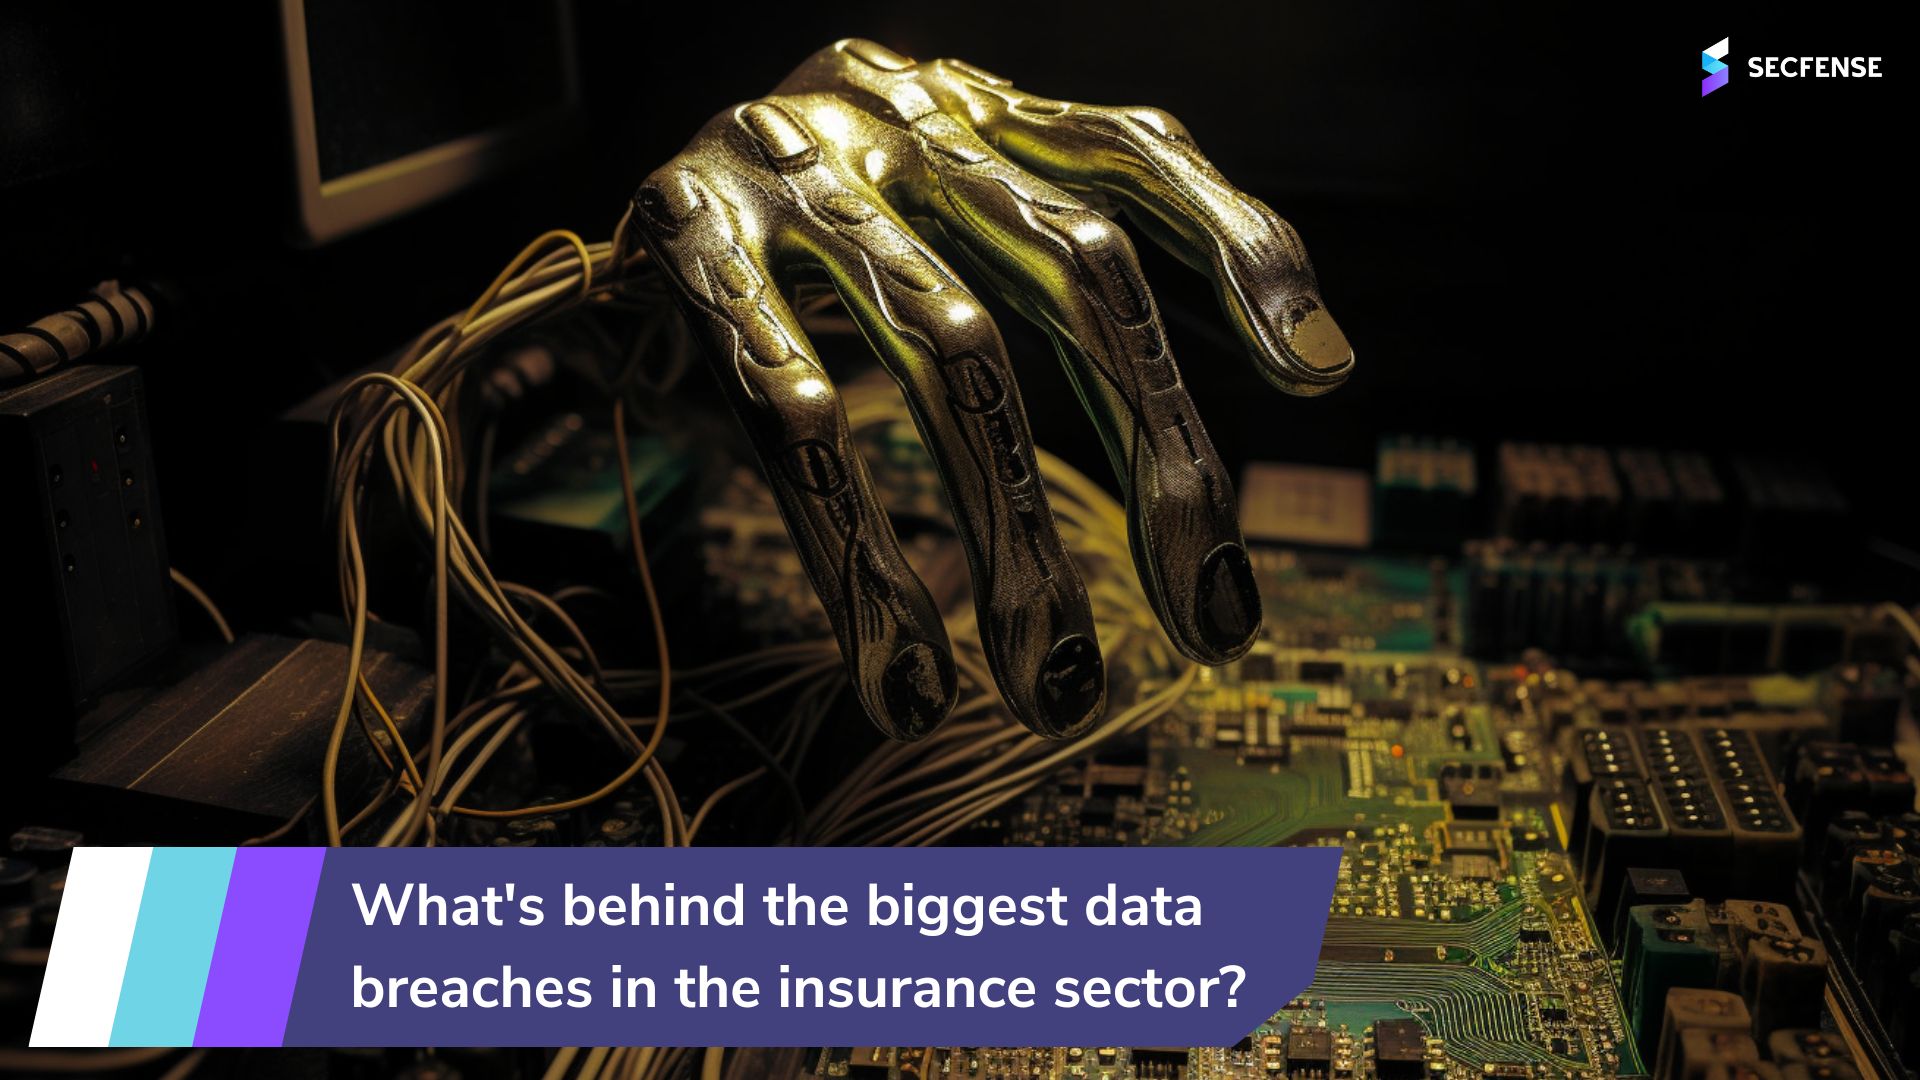 What’s behind the biggest data breaches in the insurance sector?